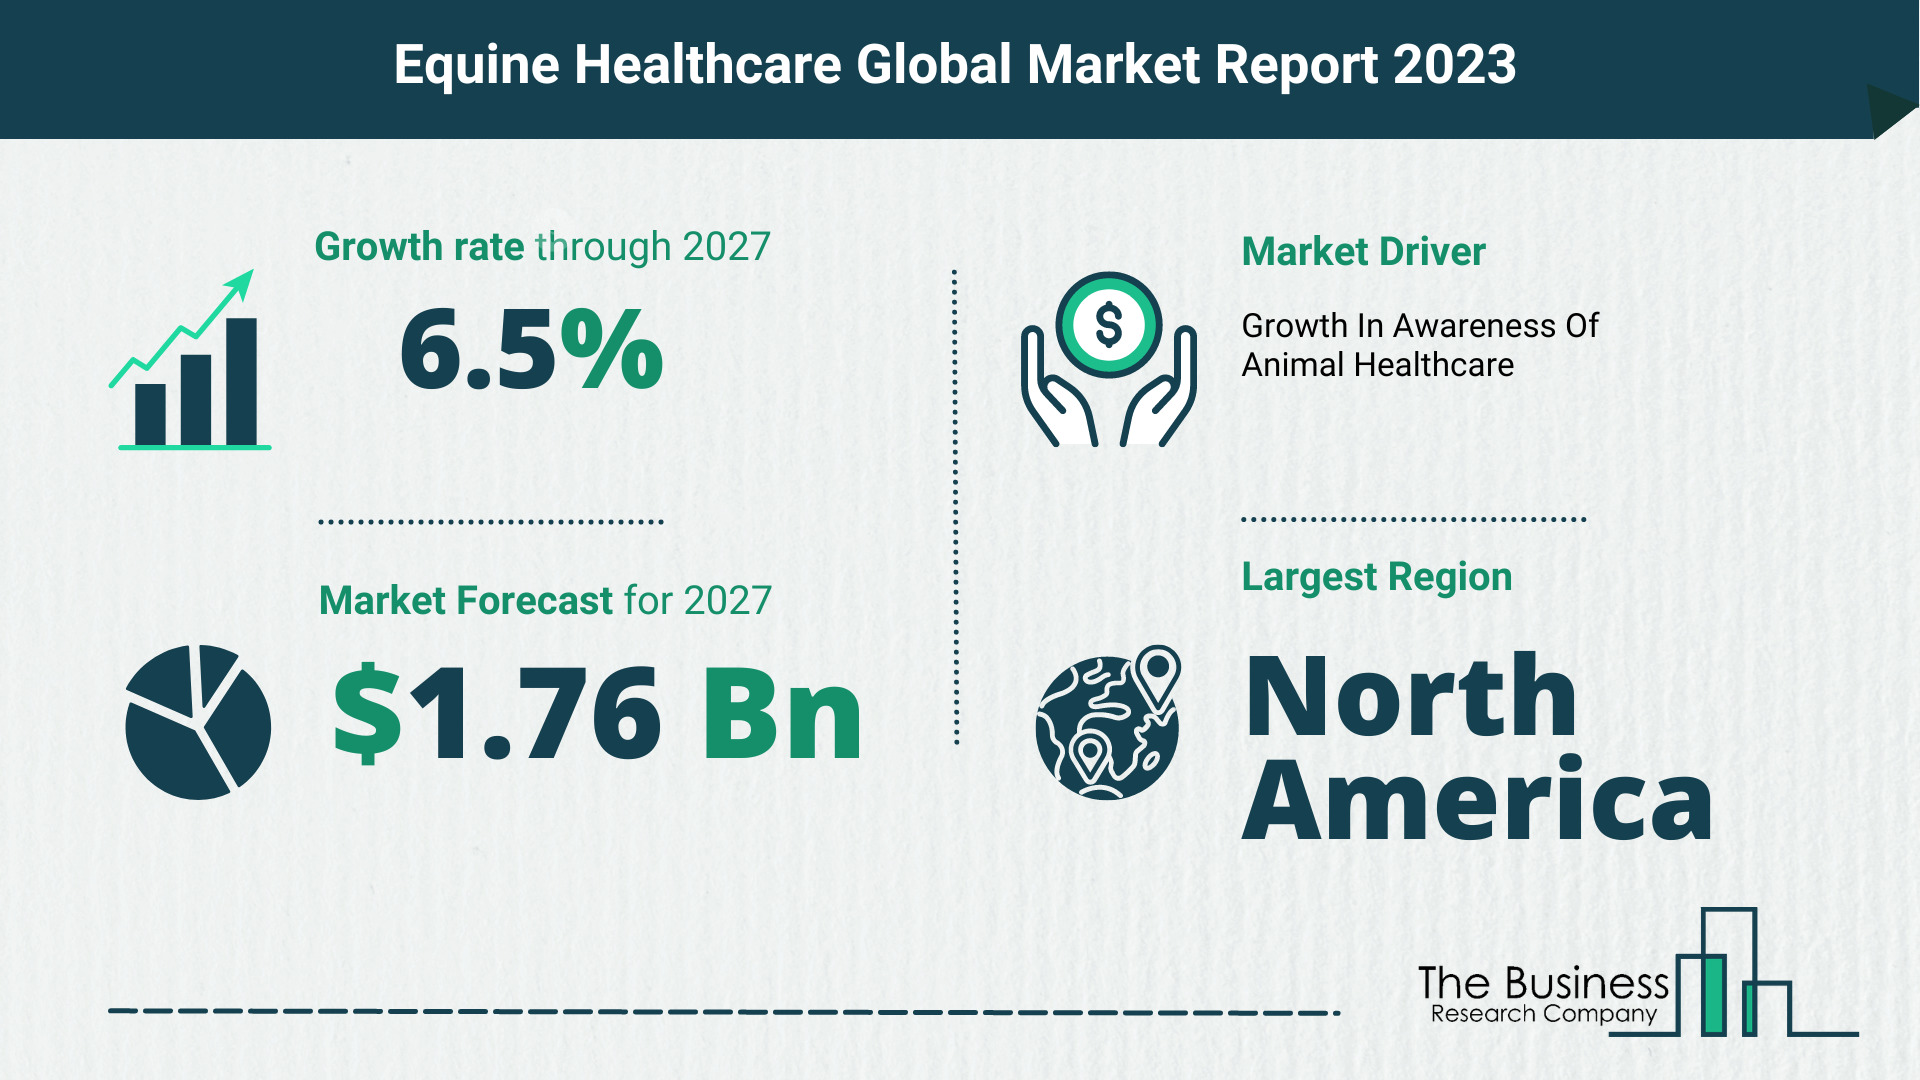 What Will The Equine Healthcare Market Look Like In 2023?